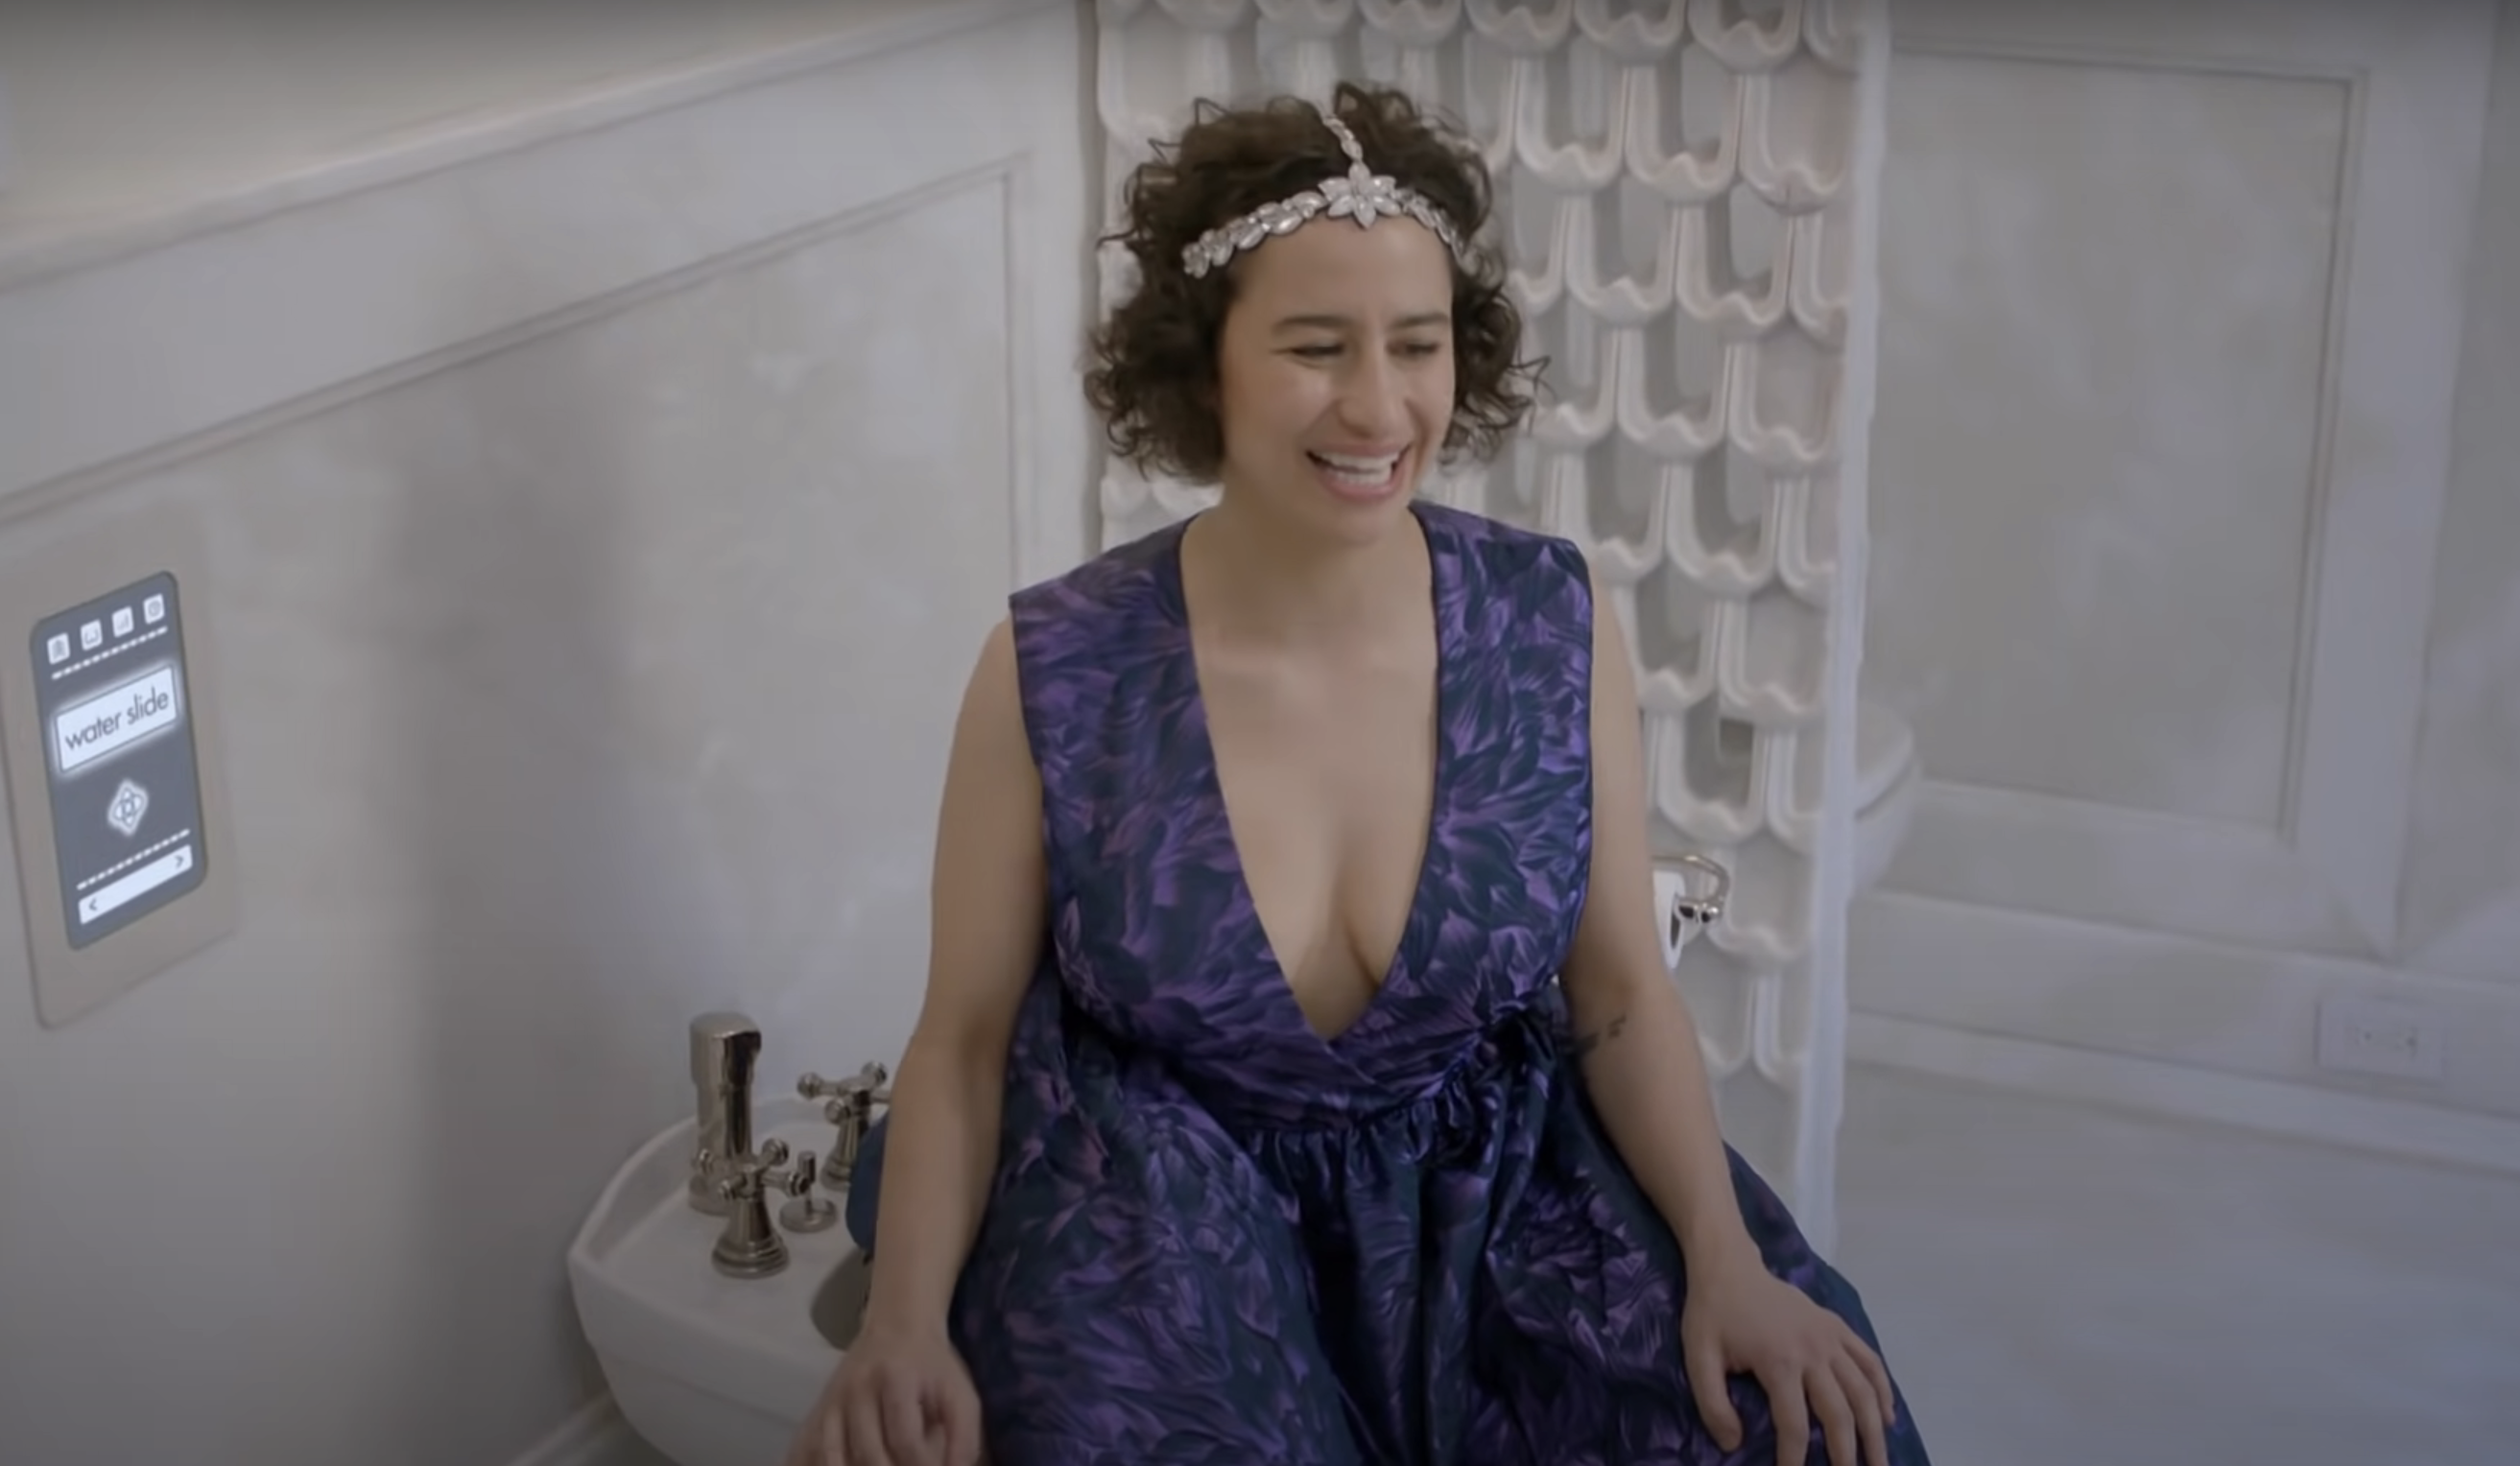 Ilana from Broad City smiling and sitting on a bidet